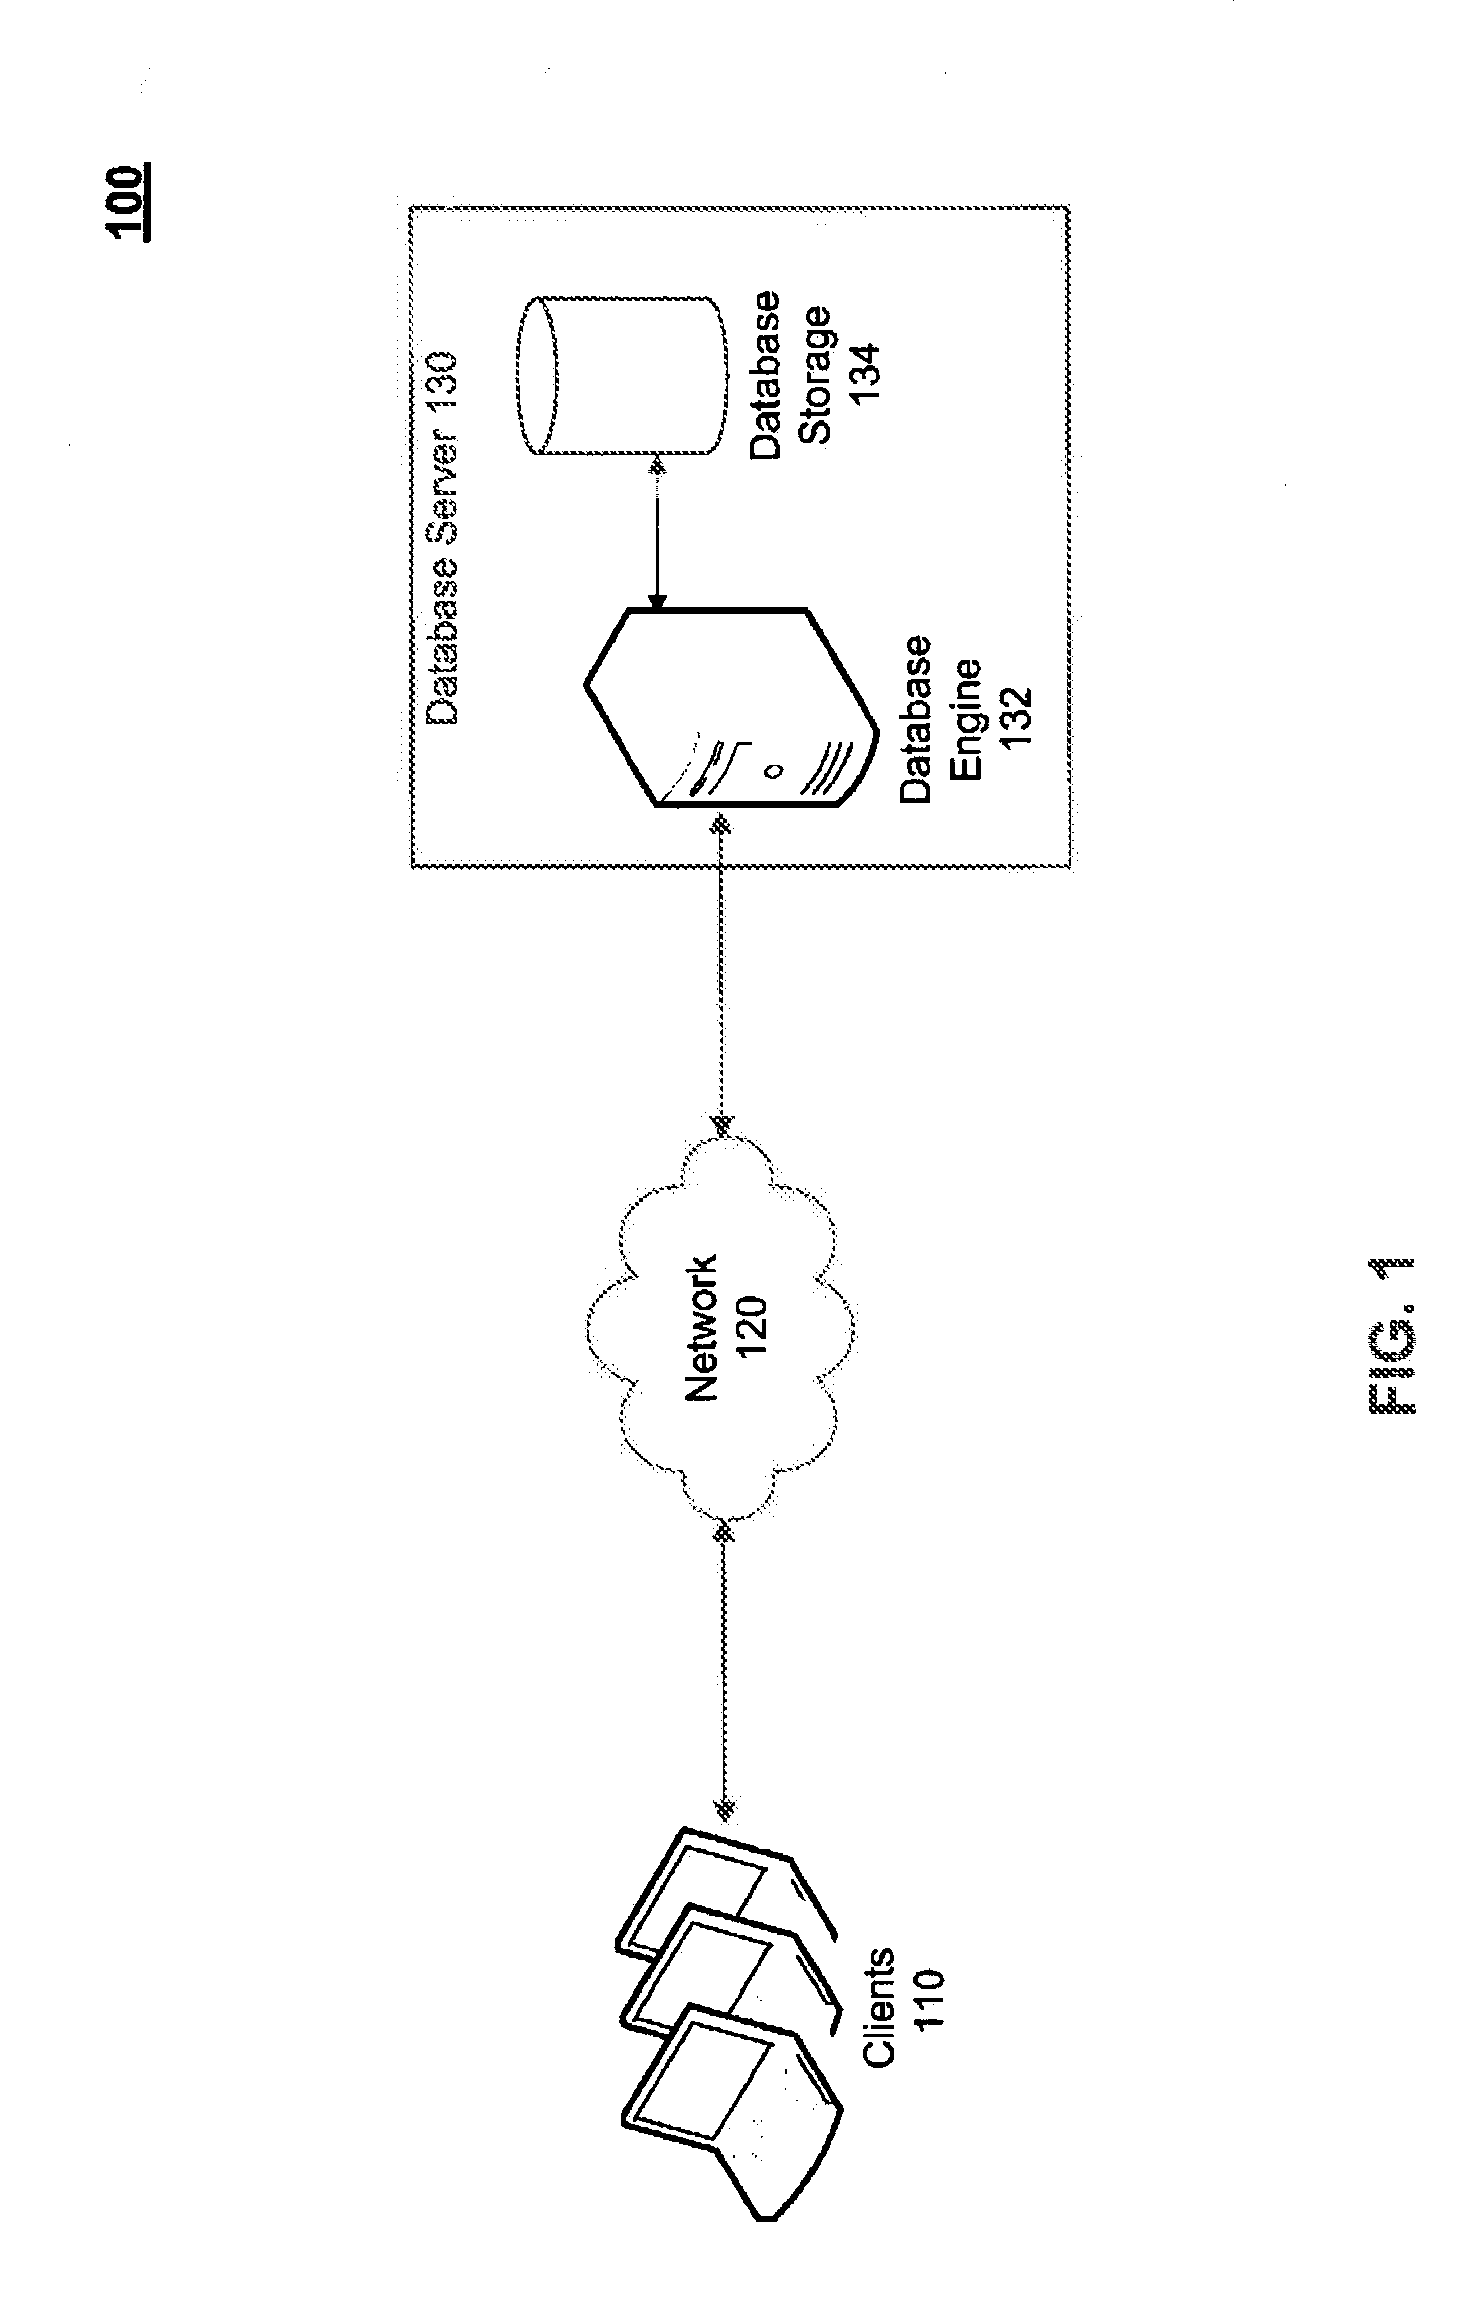 Distributed data cache database architecture